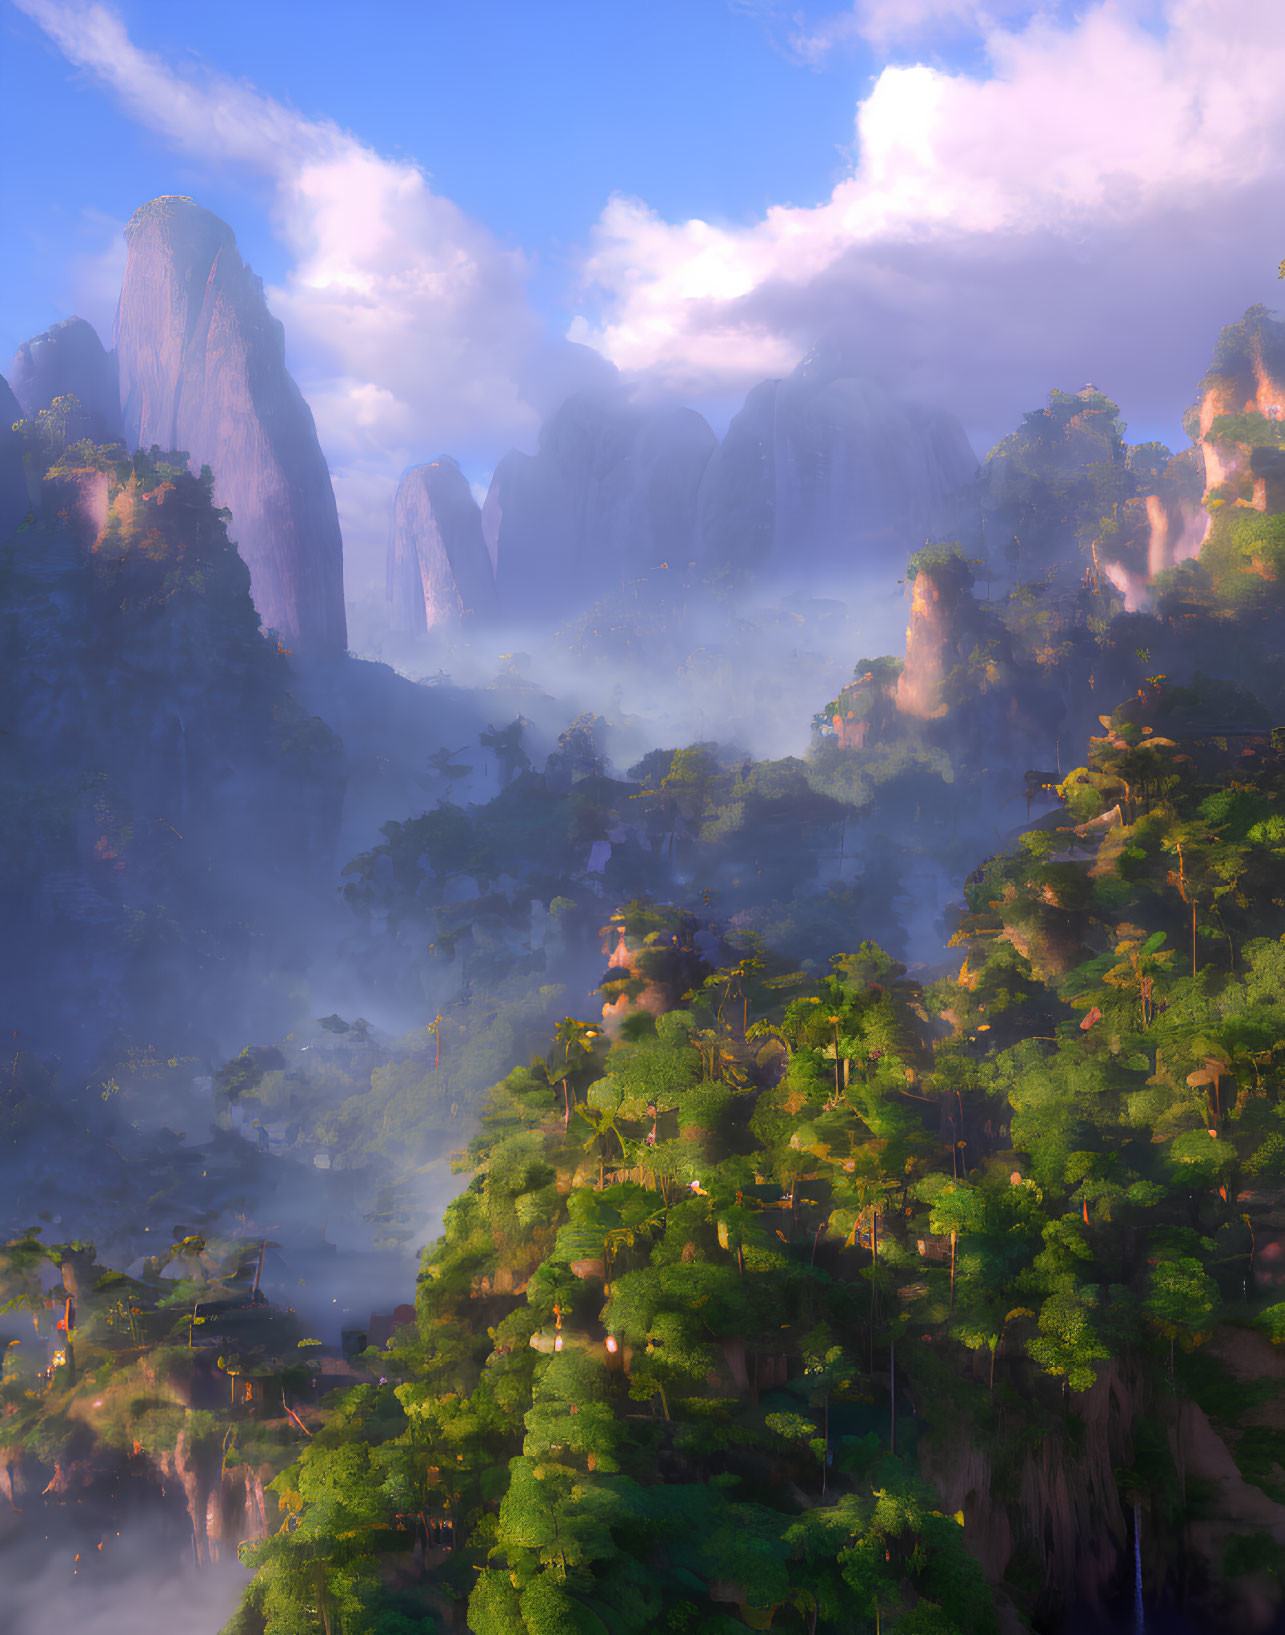 Mystical forest with towering rock formations and ethereal sunlight